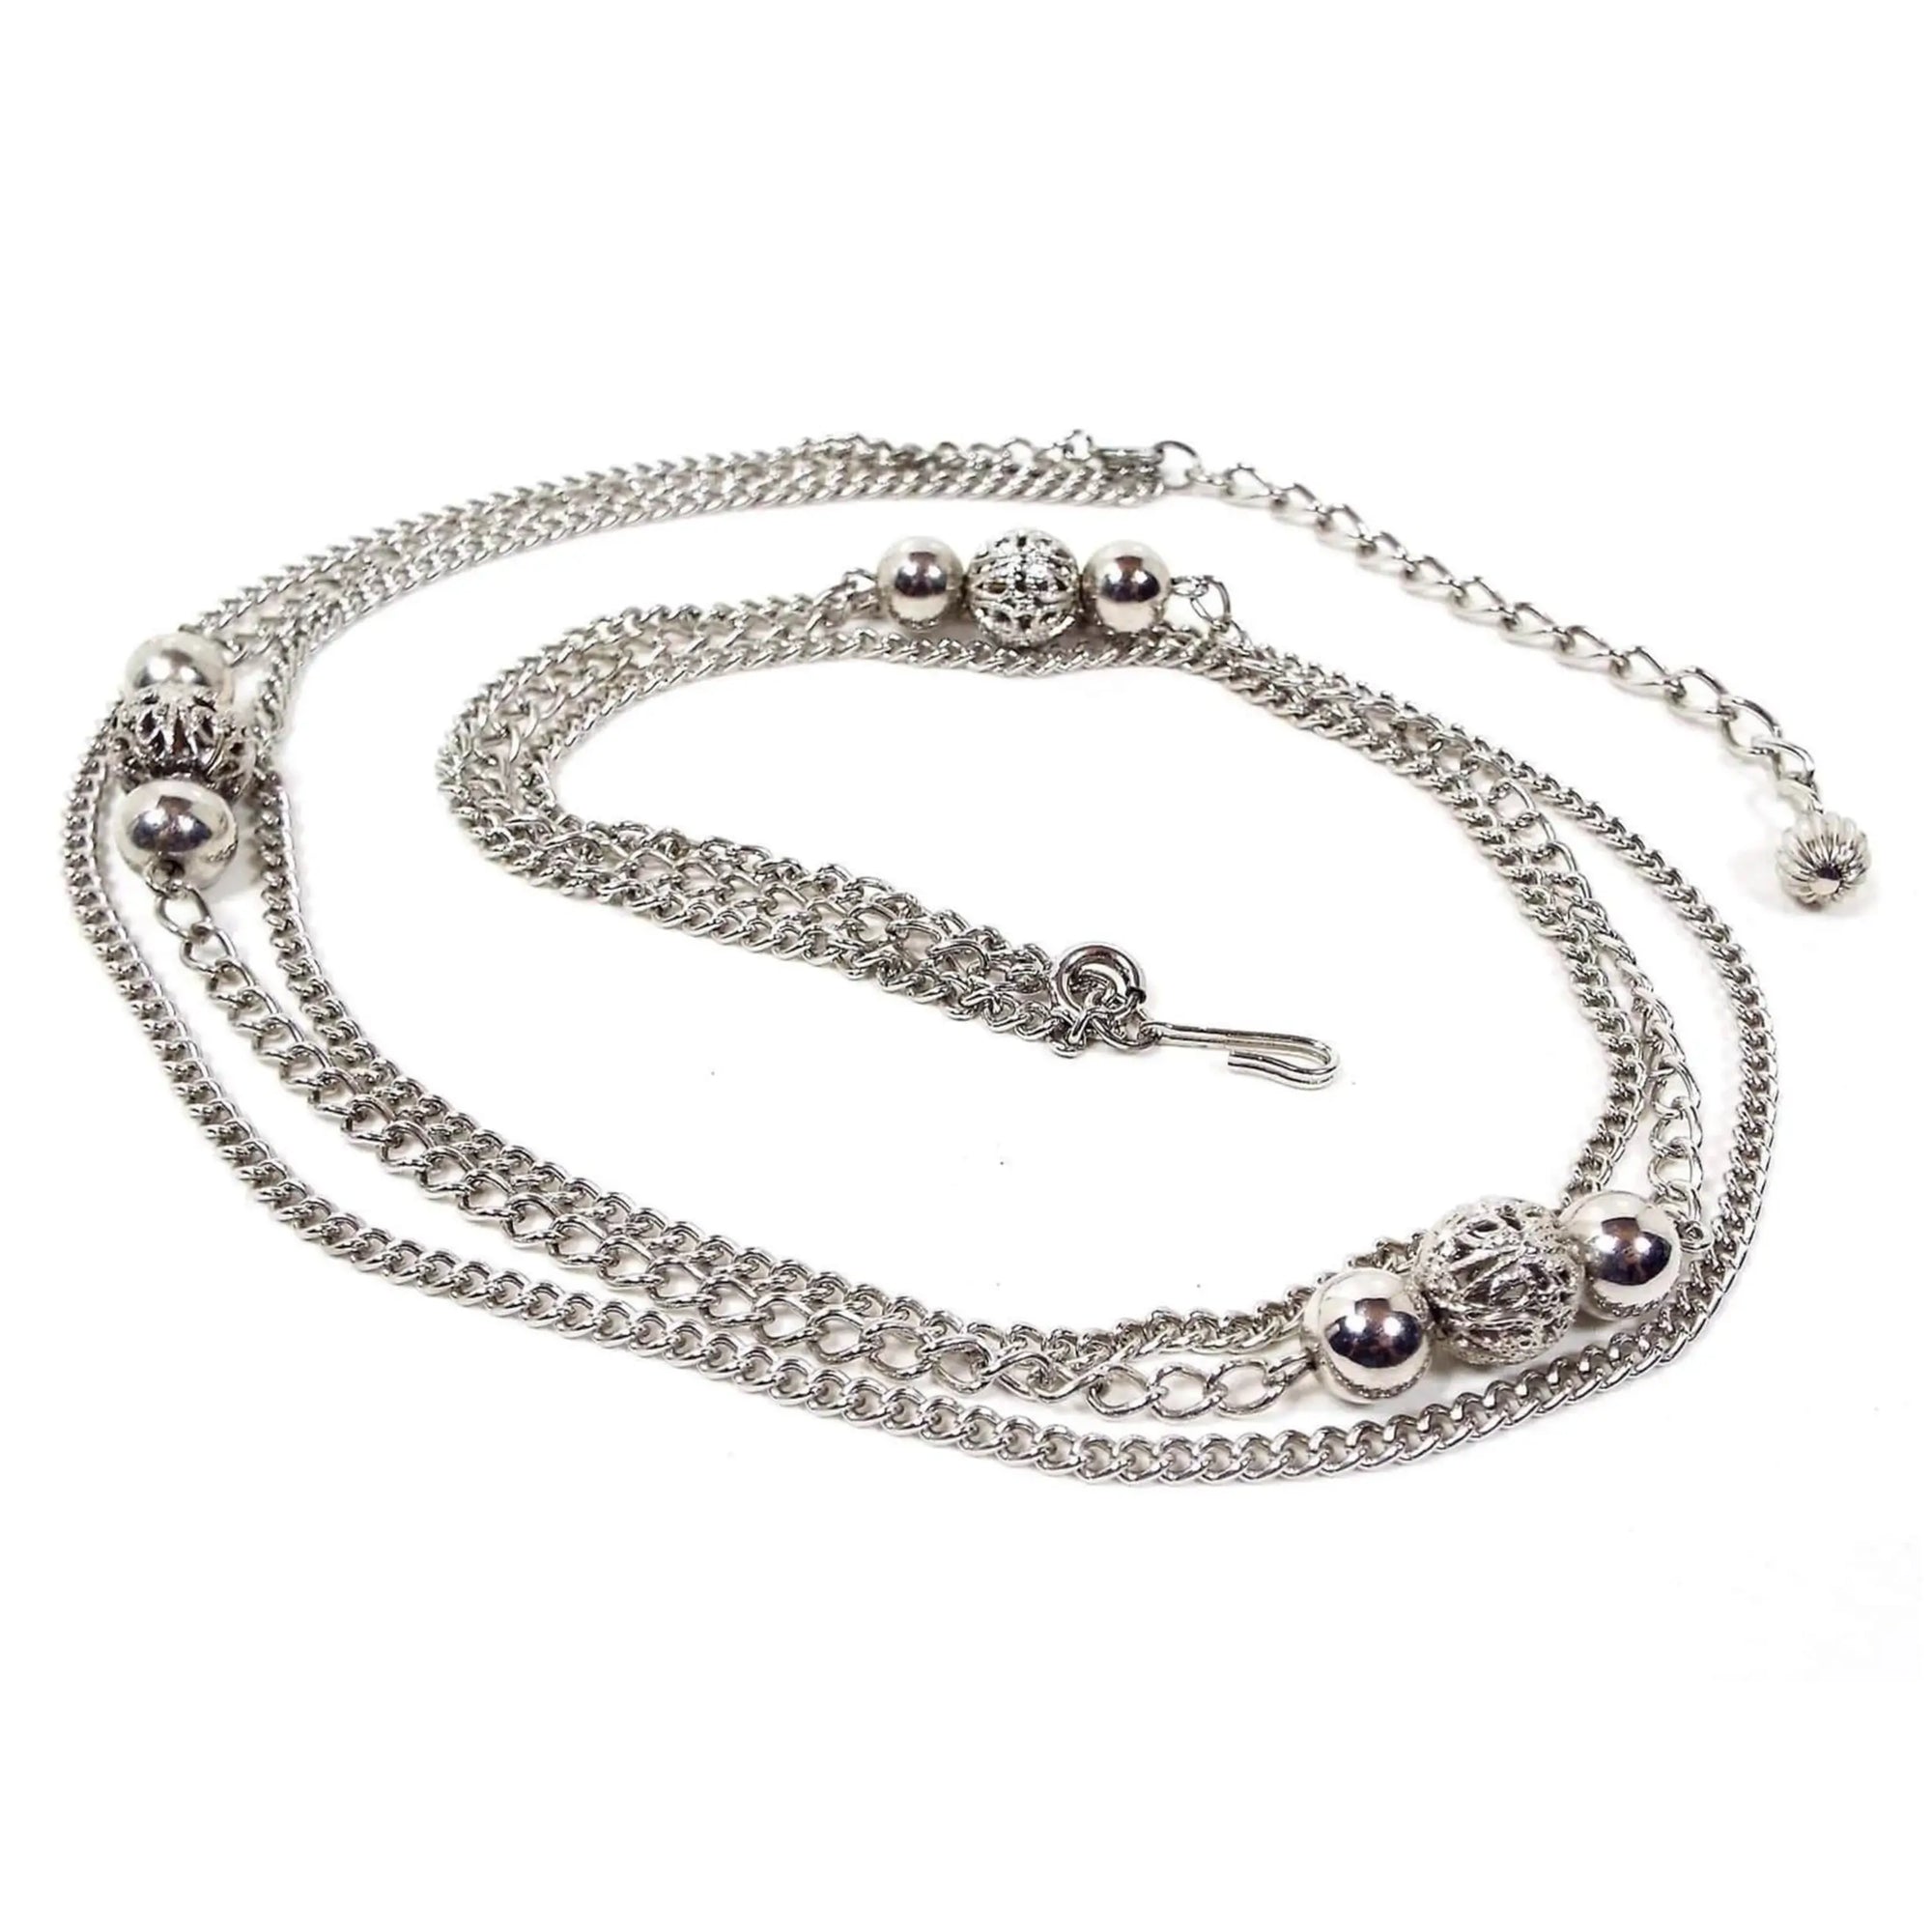 Top view of the retro vintage multi strand silver tone chain necklace. The top and bottom strands have small curb link chain. The middle strand has a wider curb link chain and three sets of metal bead clusters that have shiny round beads with filigree beads in the middle. It has spring ring clasps on the ends of the middle strand so you can remove it if desired. There is a hook clasp at the end. The other end is wider curb links with a corrugated bead at the end so you can adjust length when worn.